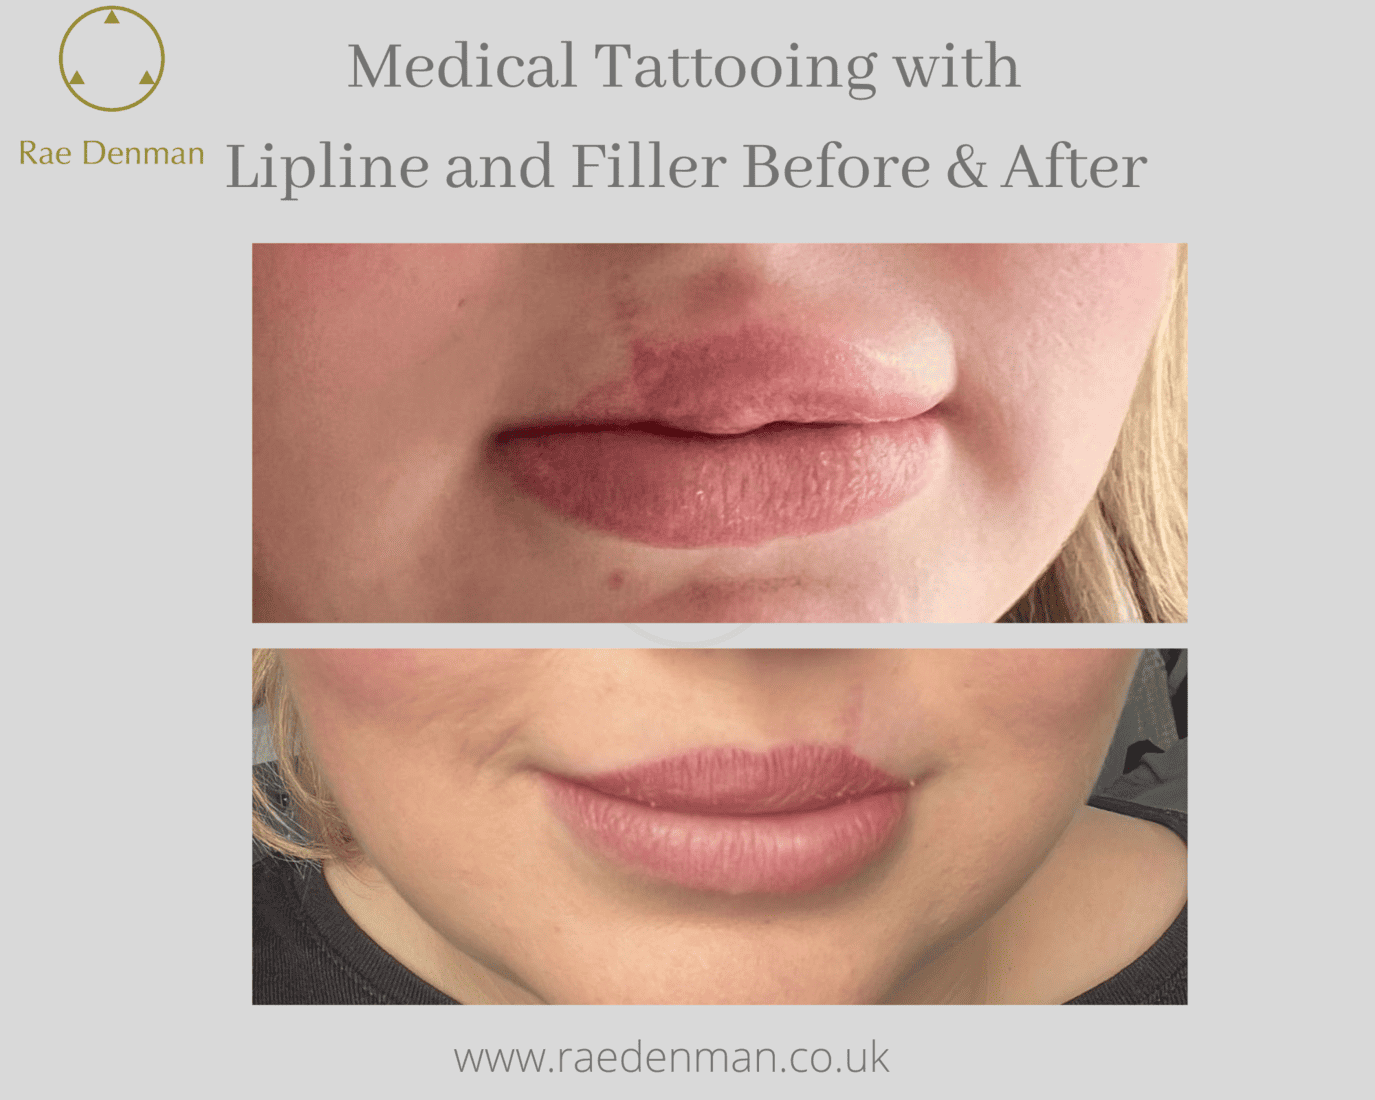 Medical Tattooing for lips to add definition and a cupids bow - Rae Denman